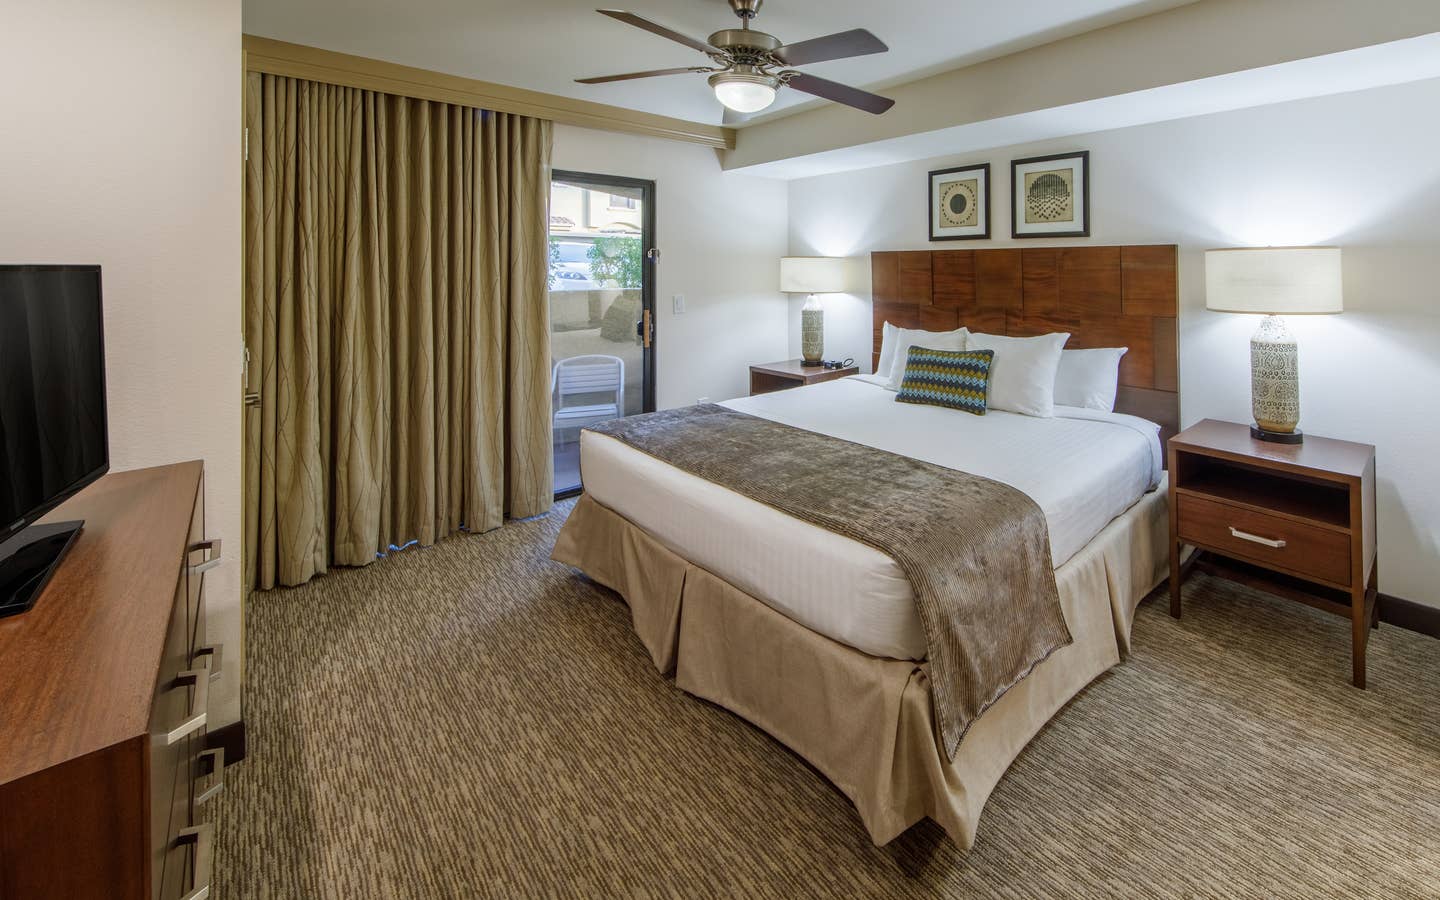 Master bedroom with access to balcony in a one-bedroom villa at Scottsdale Resort